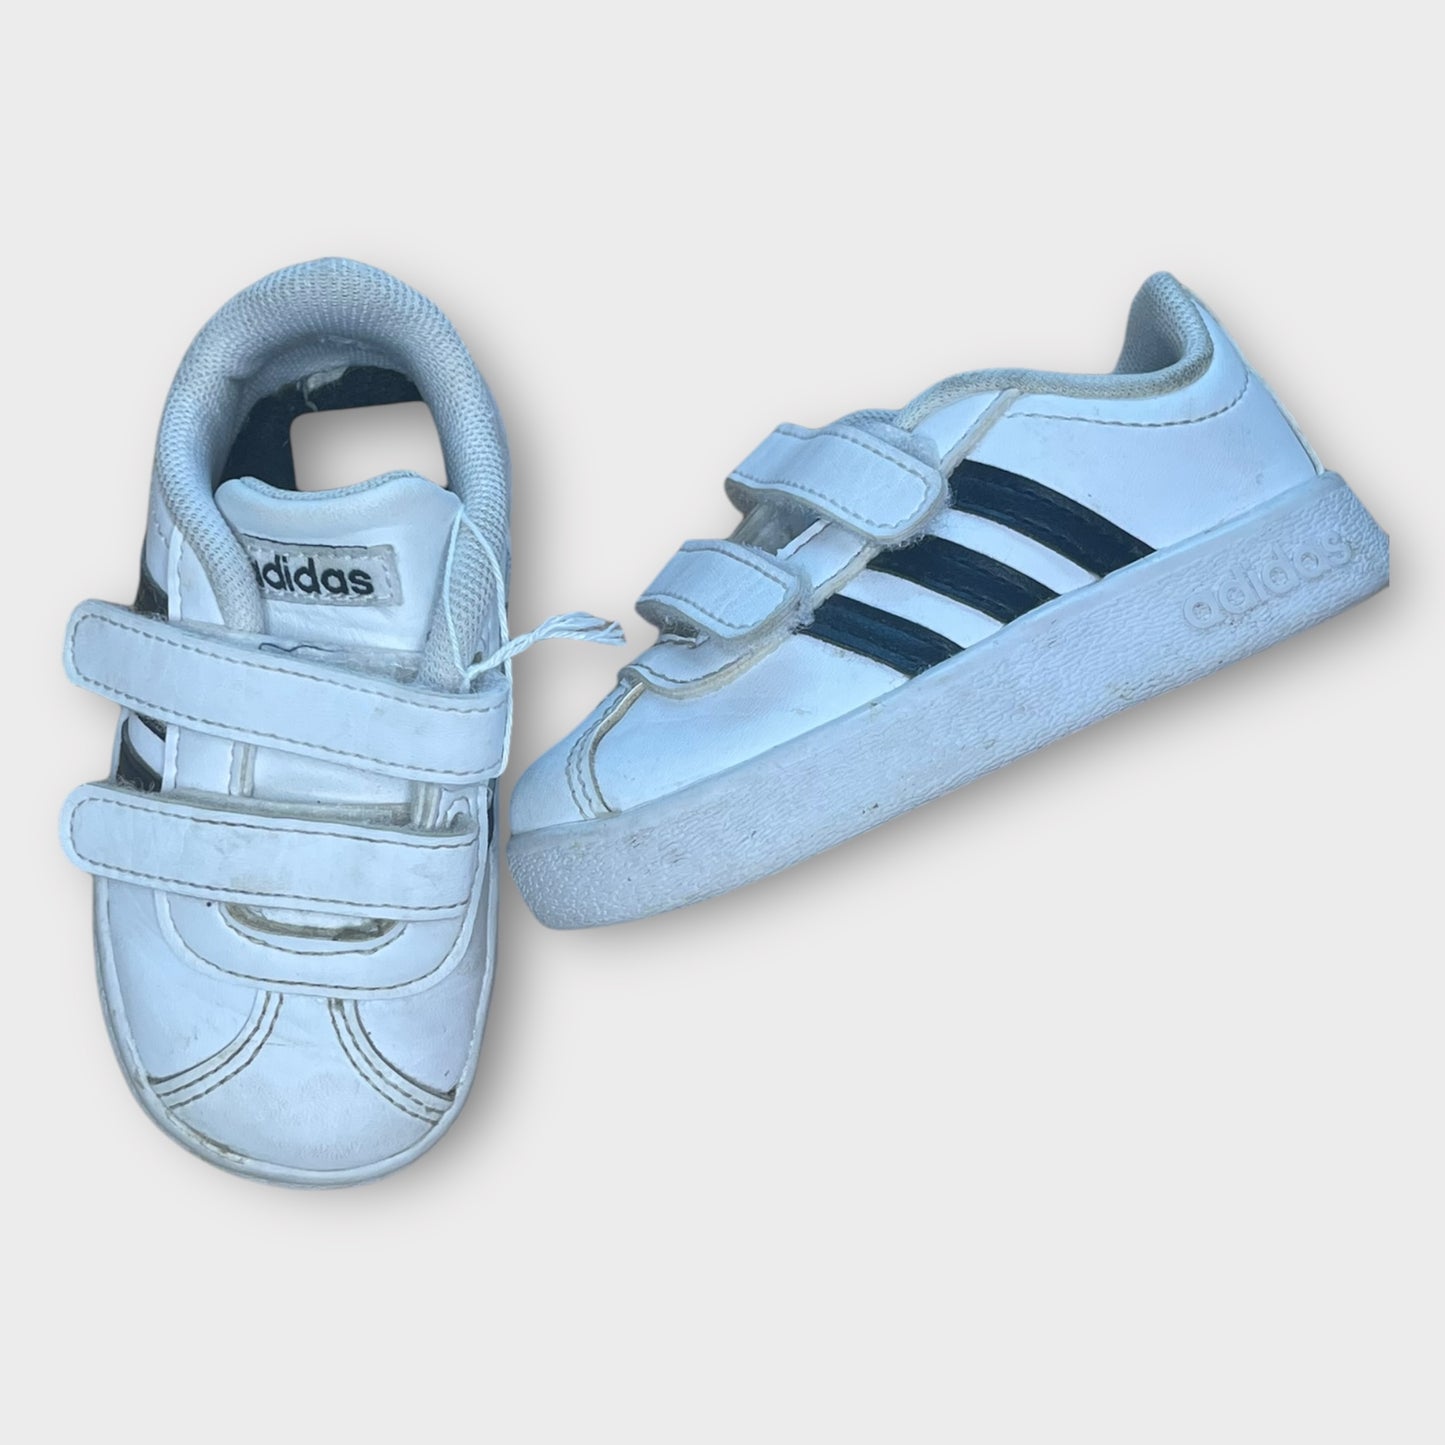 Adidas - Chaussures - Taille 20